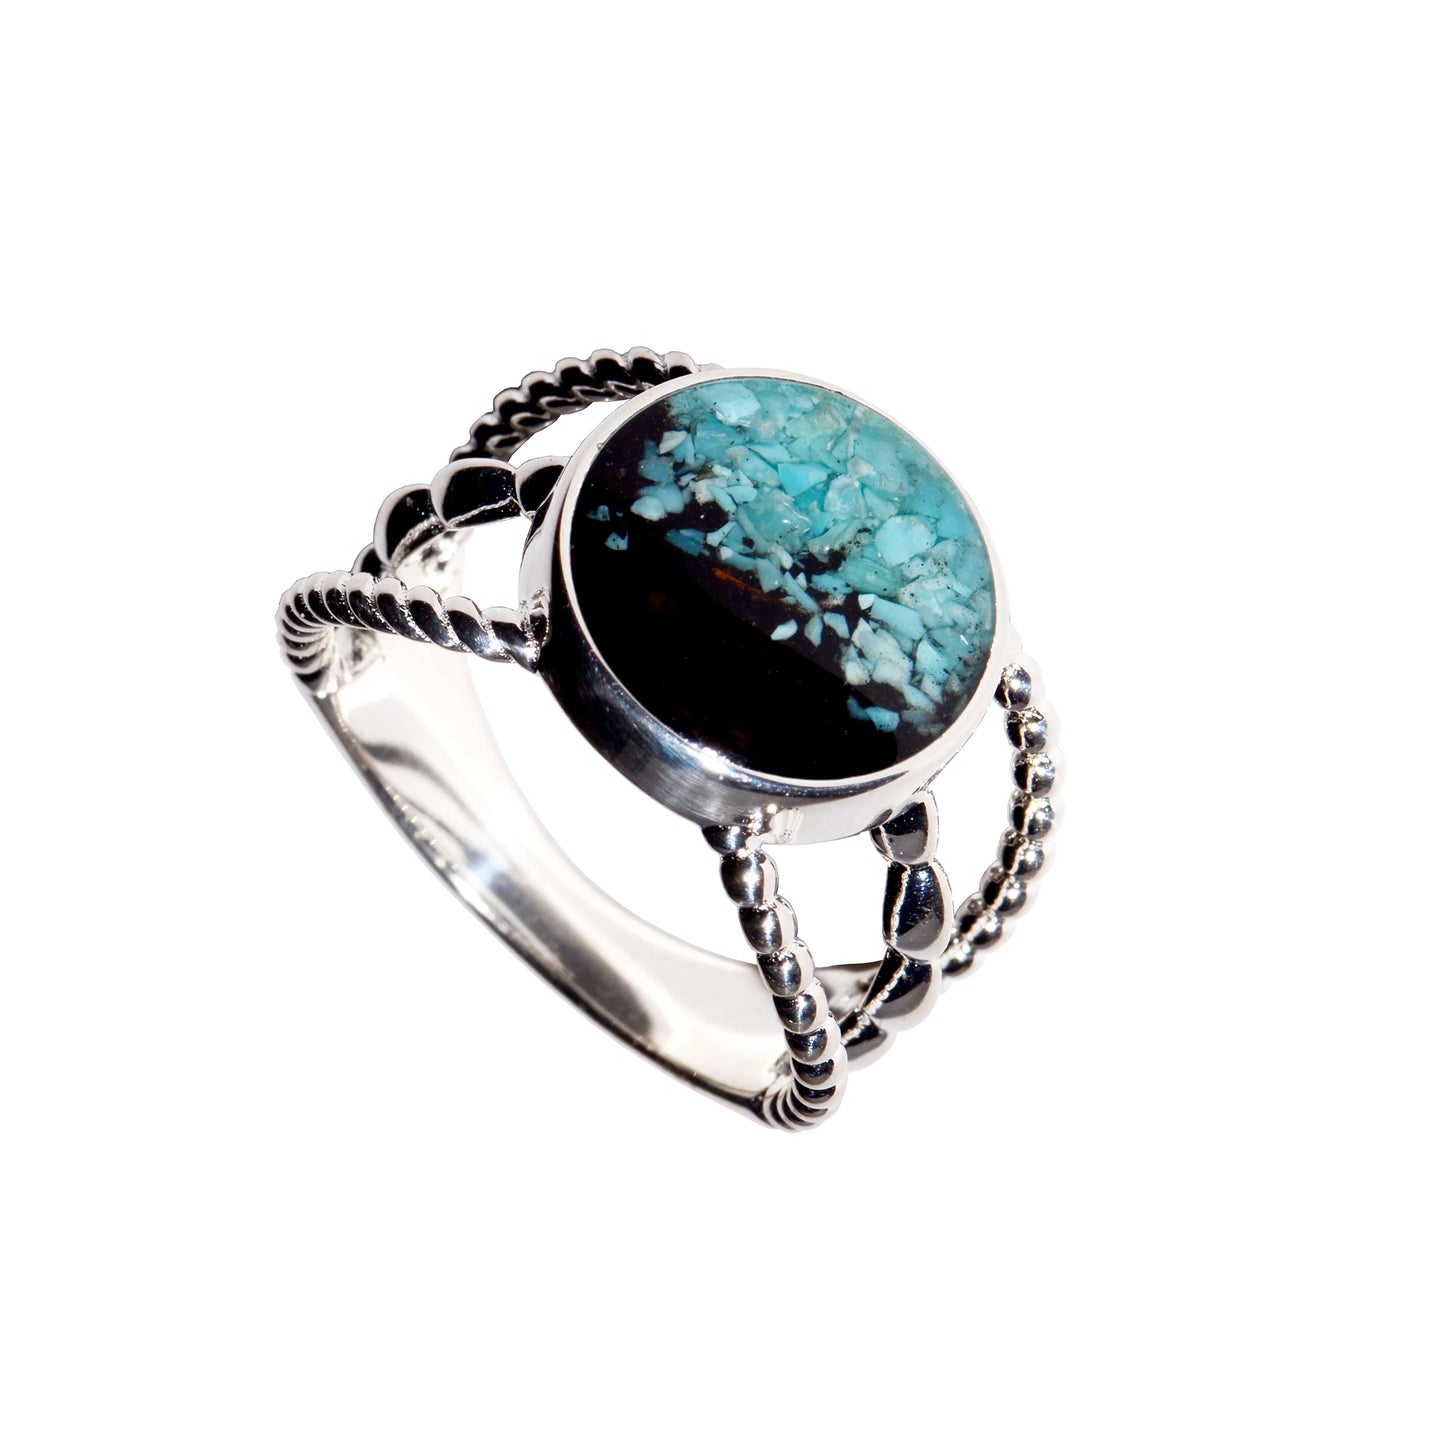 Boho Ring - Turquoise/Cathedral Rock Charged Round Ring